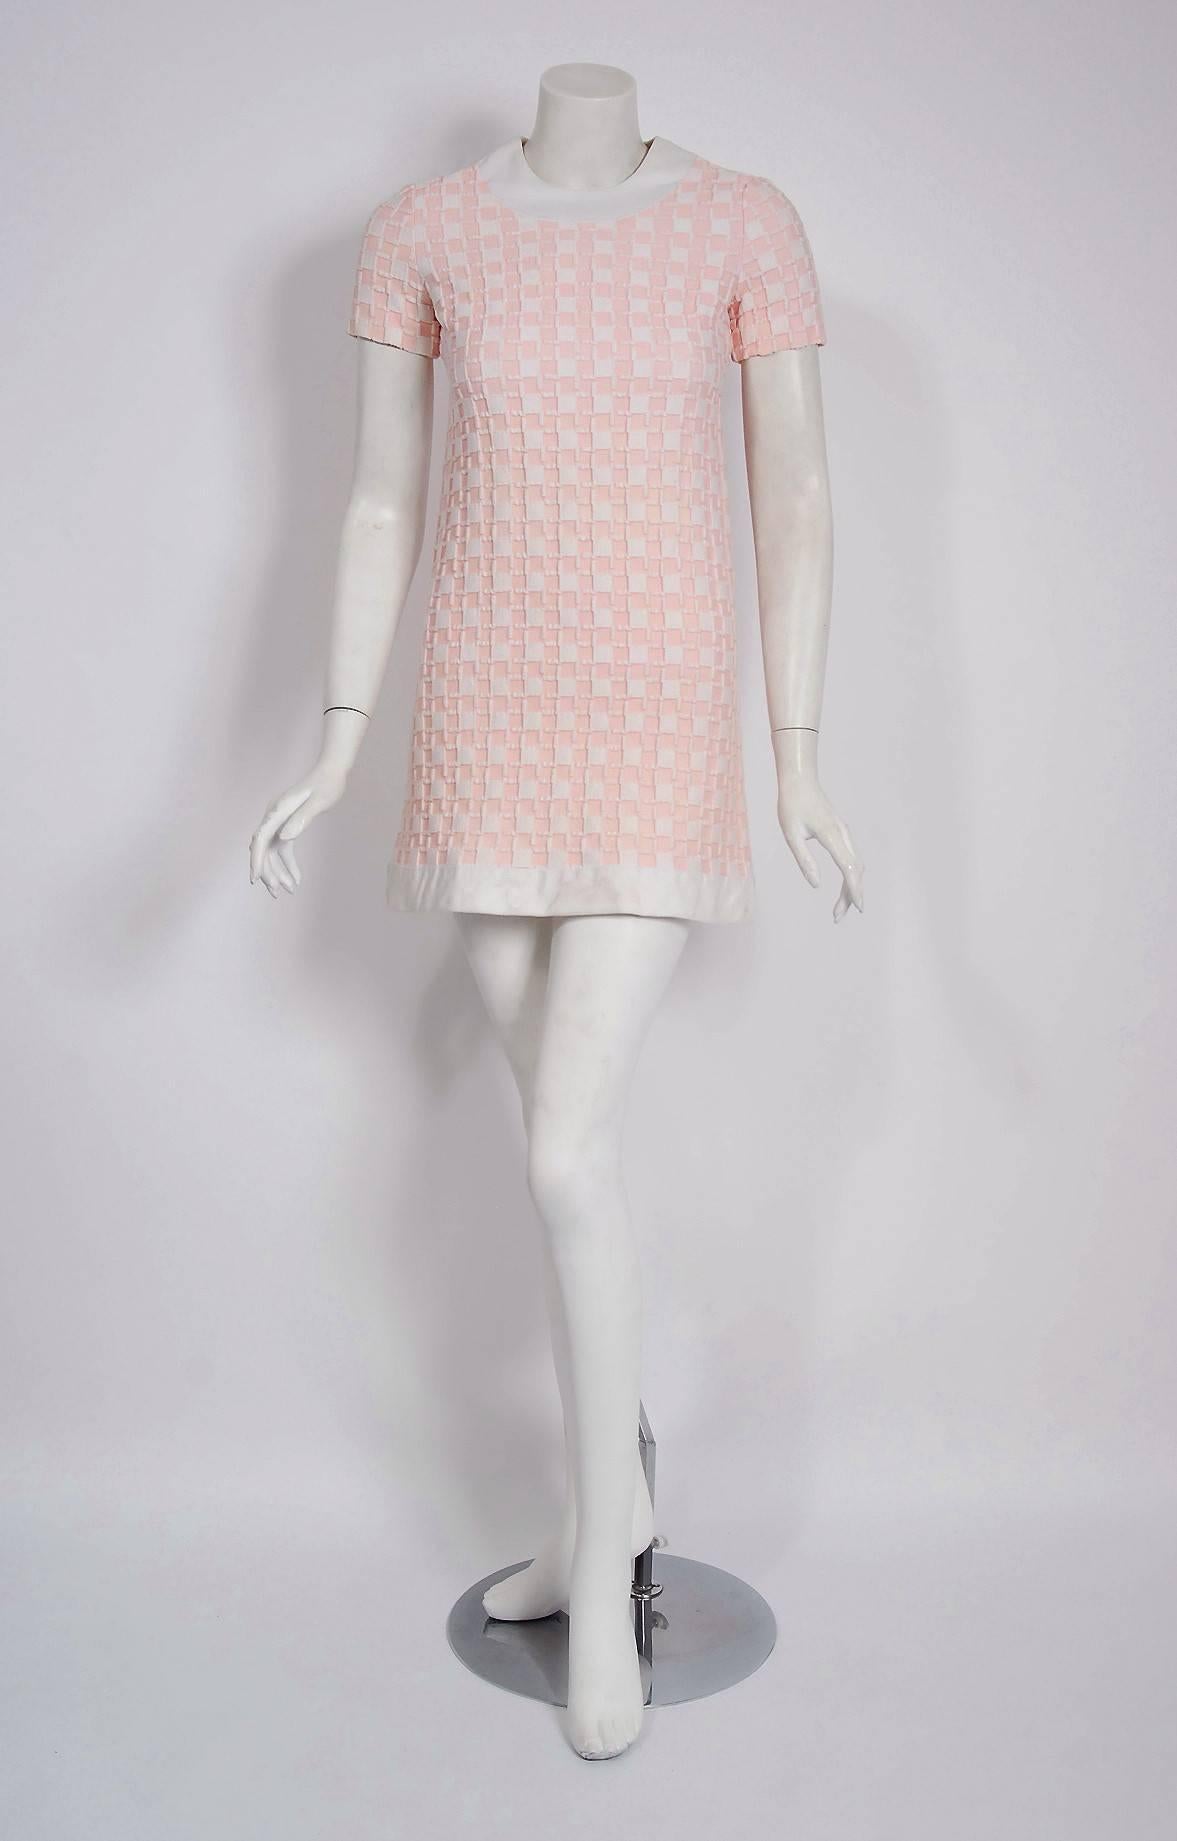 Magnificent Pierre Cardin mod dress in an elegant pink and white color combination from his iconic 1966 documented collection. In 1951 Cardin opened his own couture house and by 1957, he started a ready-to-wear line; a bold move for a French